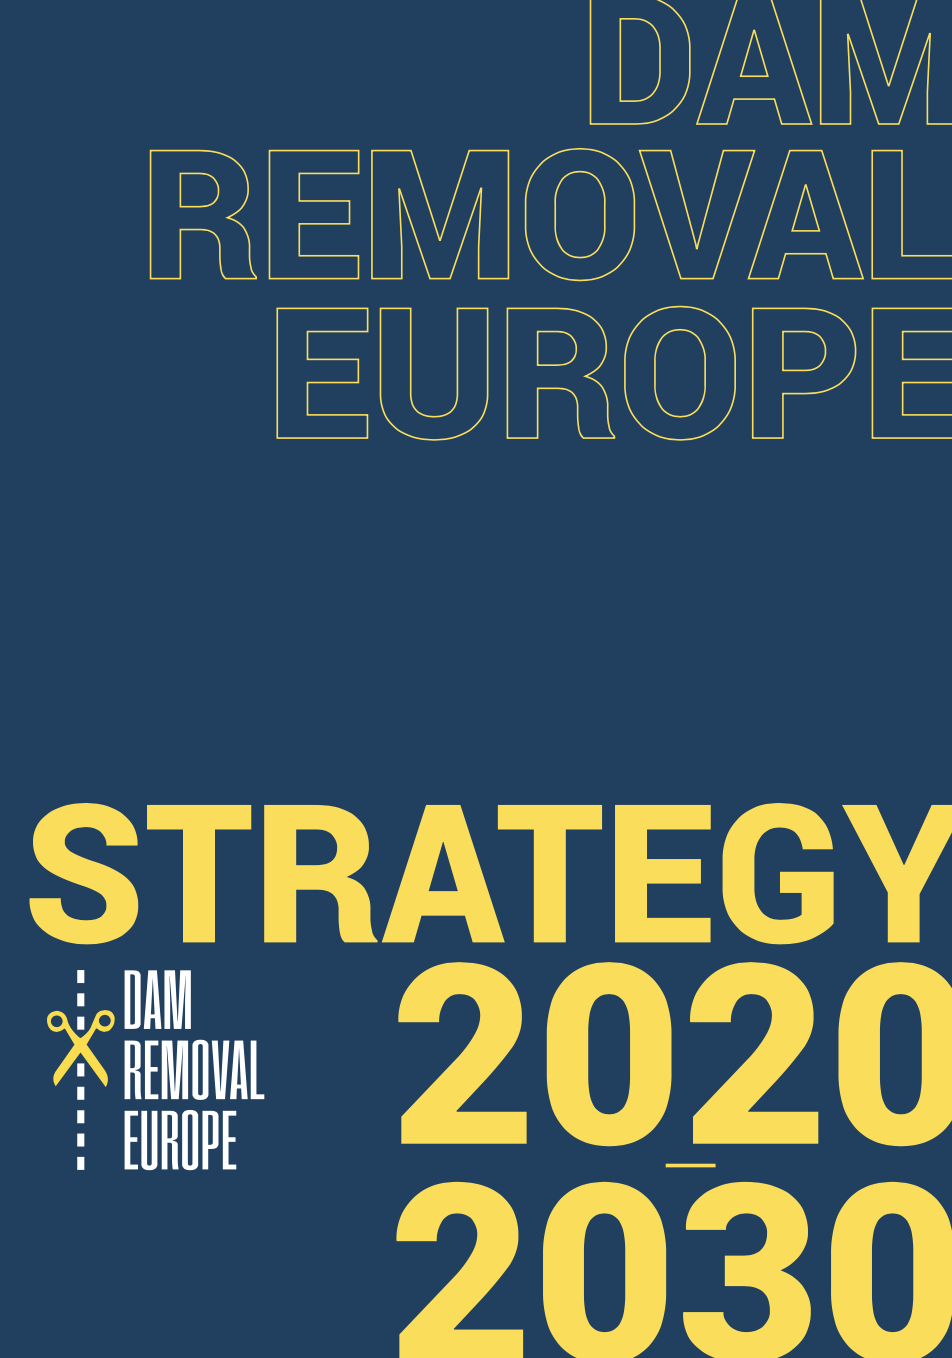 The future of Dam Removal Europe